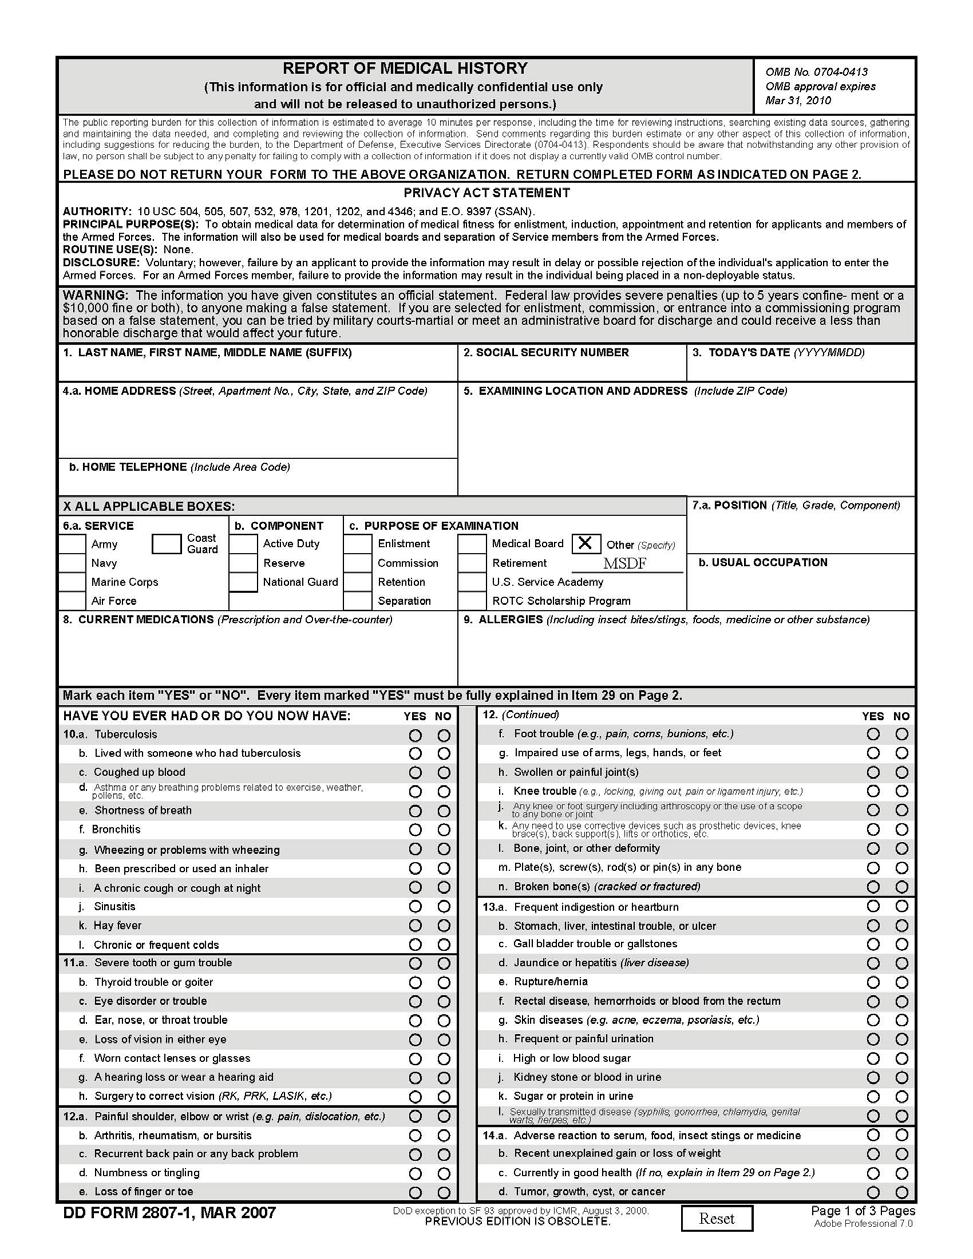 Appendix D Report of Medical History (DD Form 2807-1 with